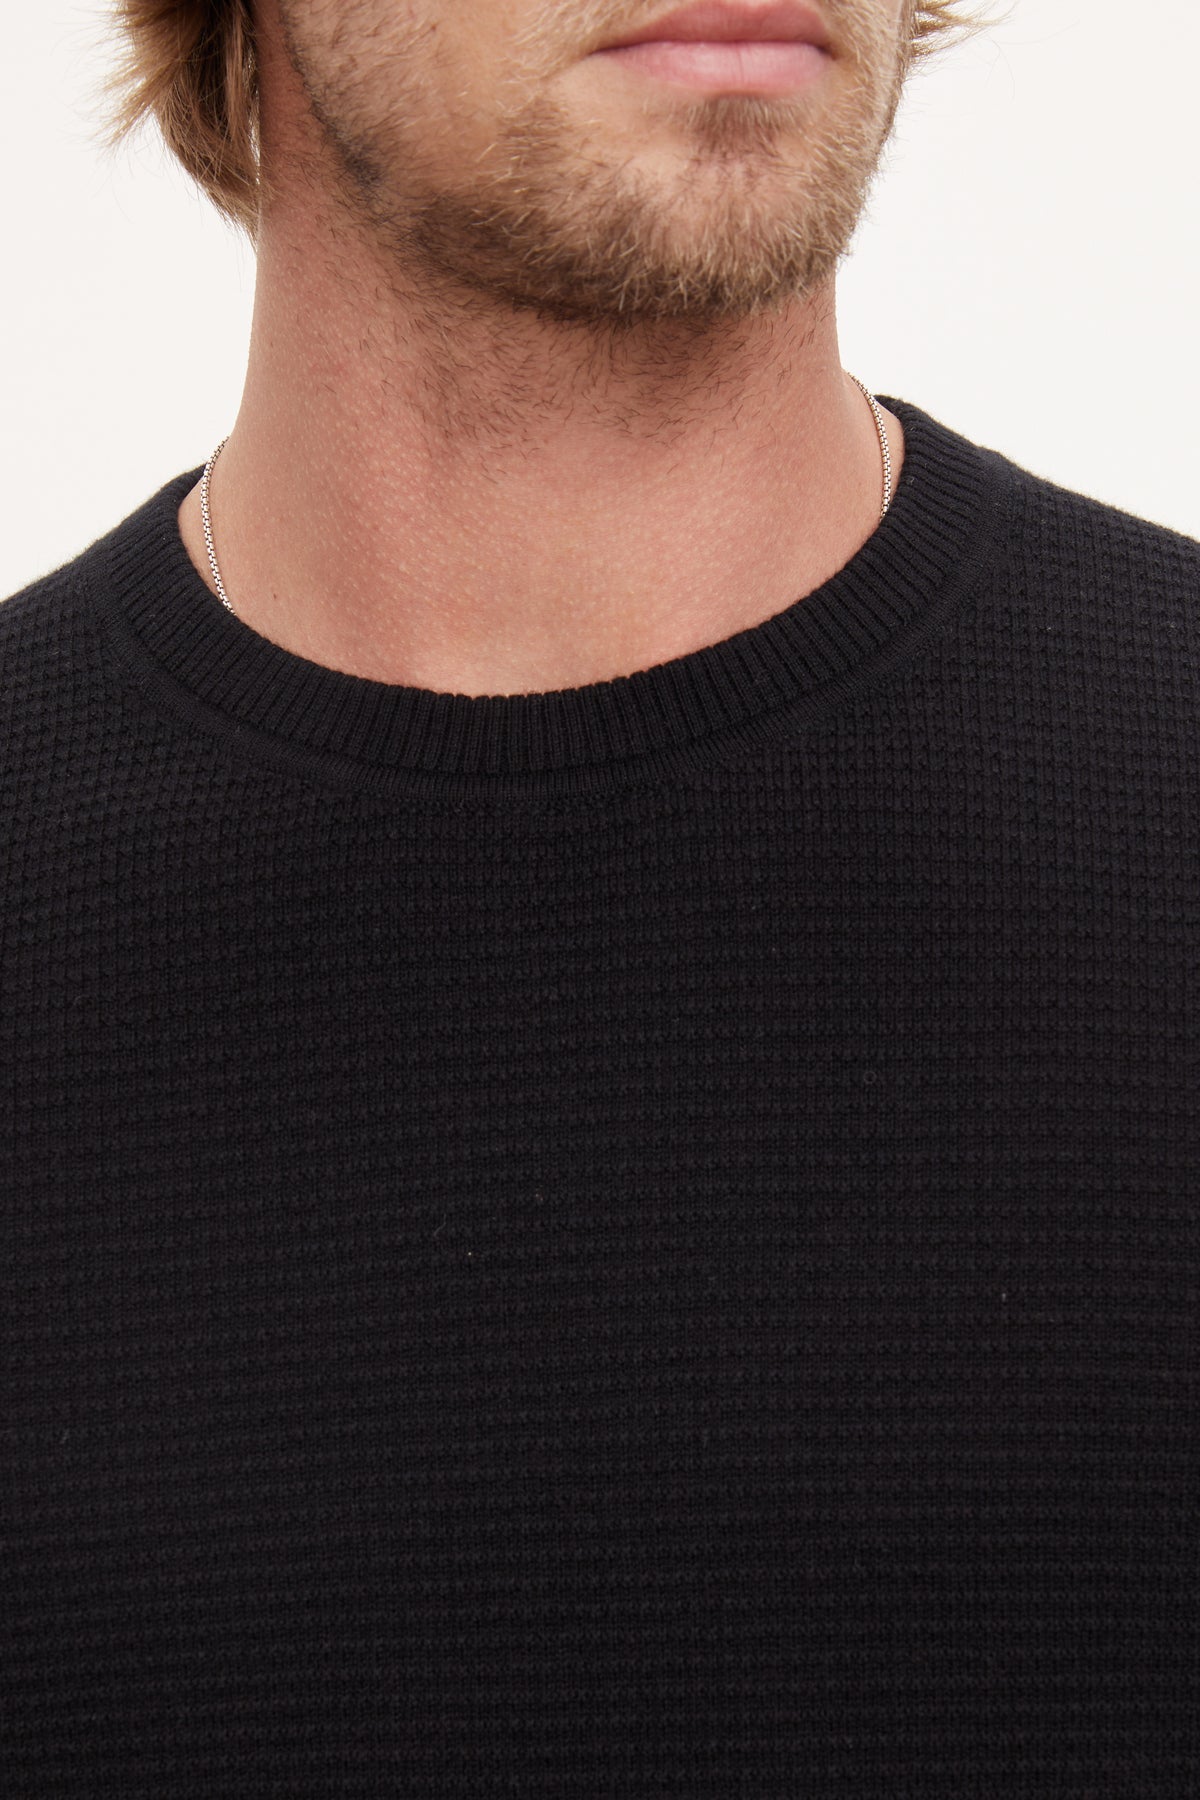 A man with long hair wearing a black Velvet by Graham & Spencer cashmere sweater.-36008998666433